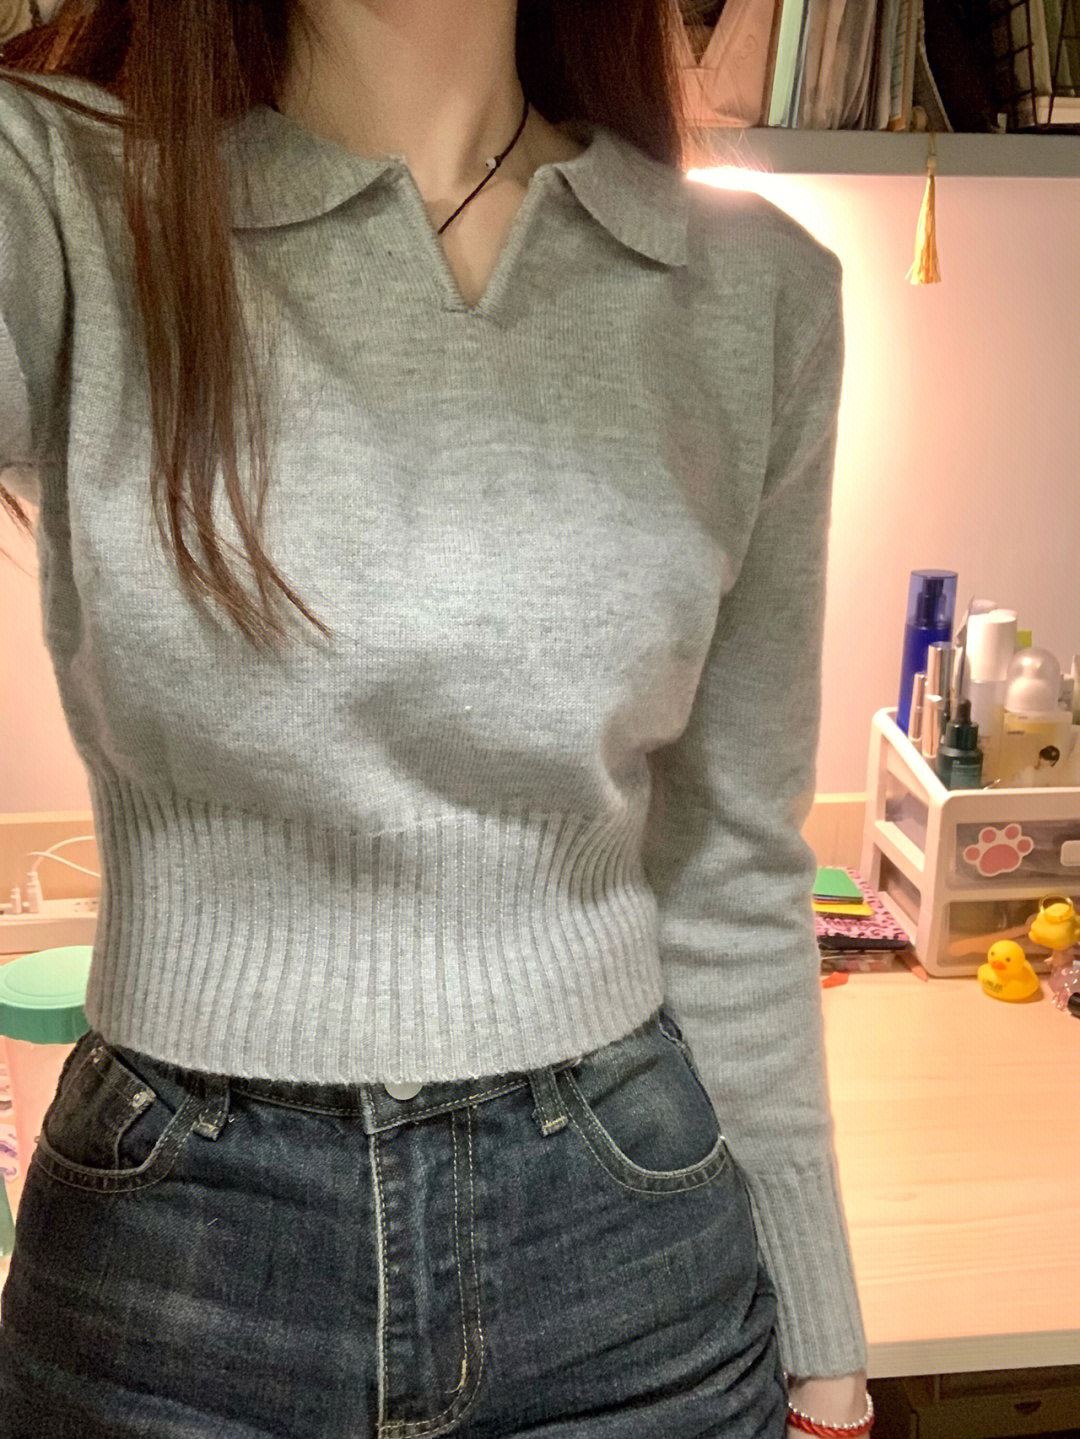 Gray waist bottoming knitted sweater women's autumn and winter front shoulder sweater slim polo sweet short beautiful top